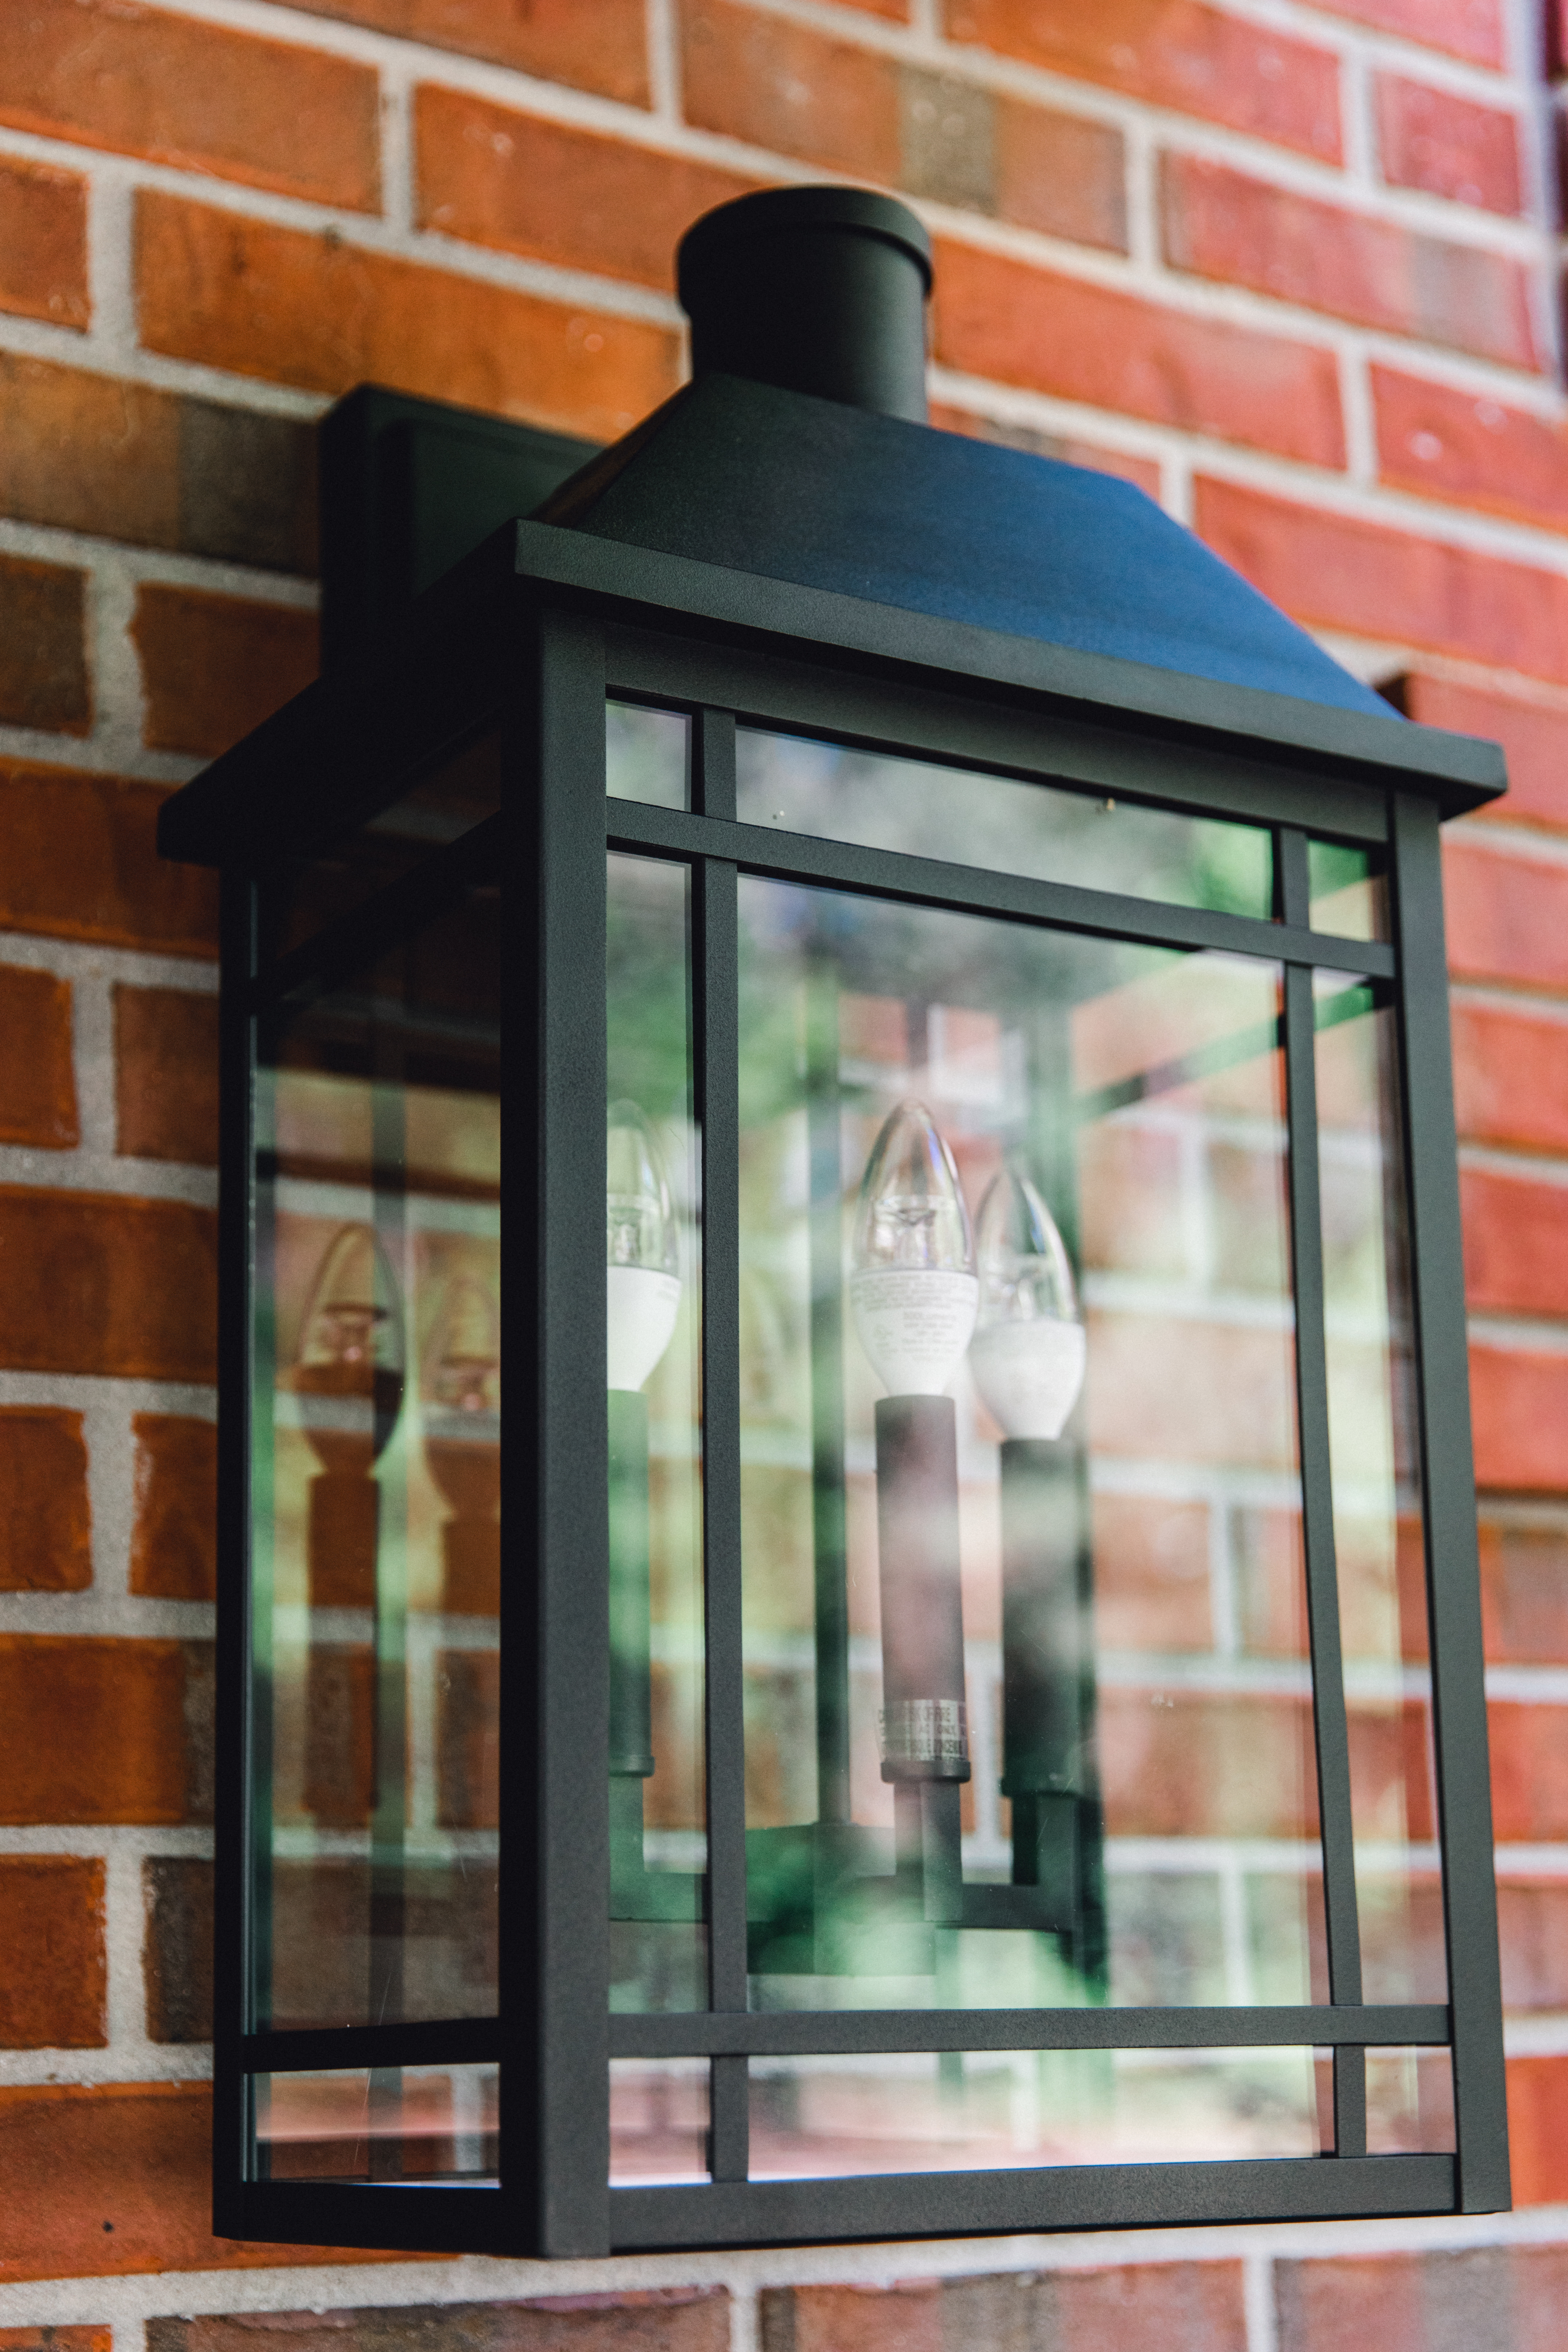 Close up of the Braden Lankford Outdoor Lantern from Capital Lighting black metal fixture mounted on brick